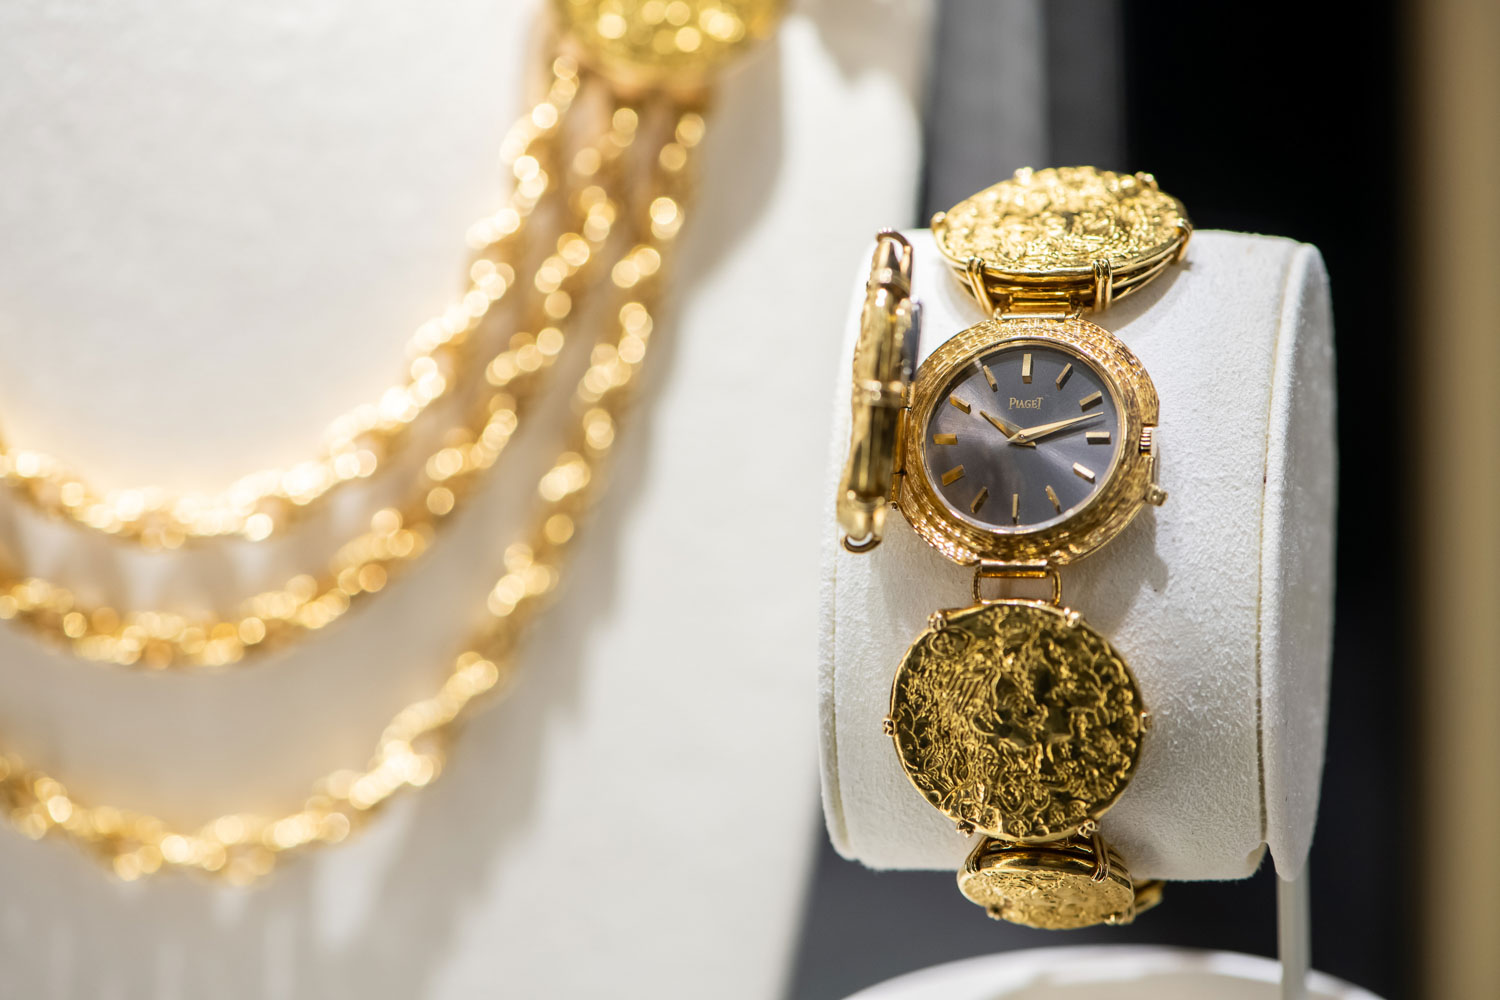 A bracelet wristwatch made with Dali d'Or coins by Piaget